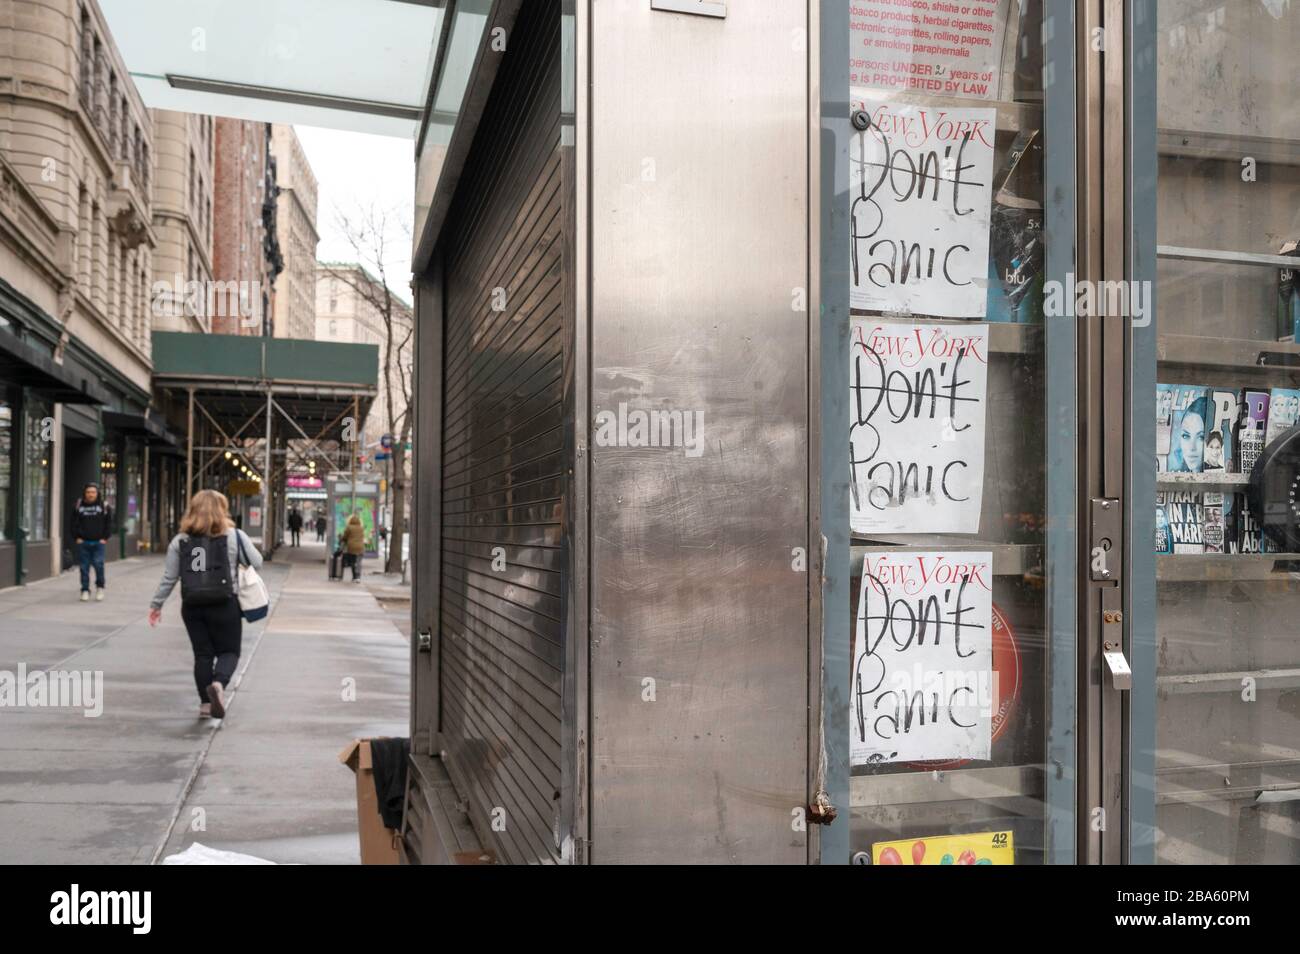 NEW YORK, NY - MARCH 25, 2020. New York Magazine covers with the headline 'Don't Panic' are displayed in a shuttered newsstand on the Upper West Side of Manhattan during the Coronavirus outbreak. The World Health Organization declared coronavirus (COVID-19) a global pandemic on March 11th. Stock Photo